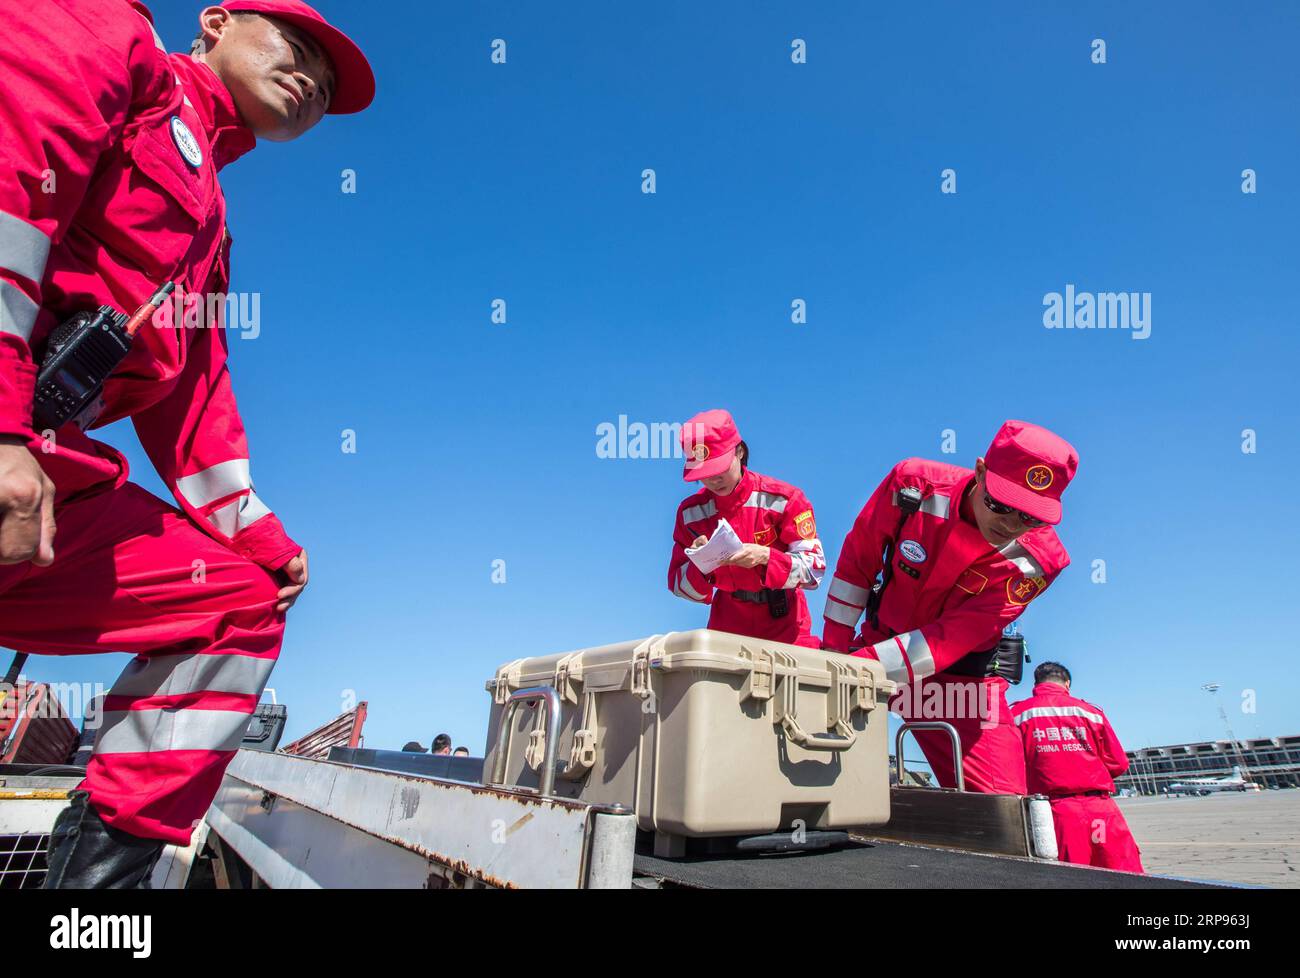 (190325) -- BEIRA (MOZAMBIQUE), March 25, 2019 (Xinhua) -- Chinese rescue team members transfer the newly-arrived equipment and materials at Beira International Airport, Beira, Mozambique, on March 25, 2019. A Chinese rescue team comprised of 65 members arrived at Beira International Airport in Mozambique on Monday after Cyclone Idai wreaked havoc in the southeastern African country. (Xinhua/Zhang Yu) MOZAMBIQUE-BEIRA-CYCLONE IDAI-CHINA-RESCUE TEAM-ARRIVAL PUBLICATIONxNOTxINxCHN Stock Photo